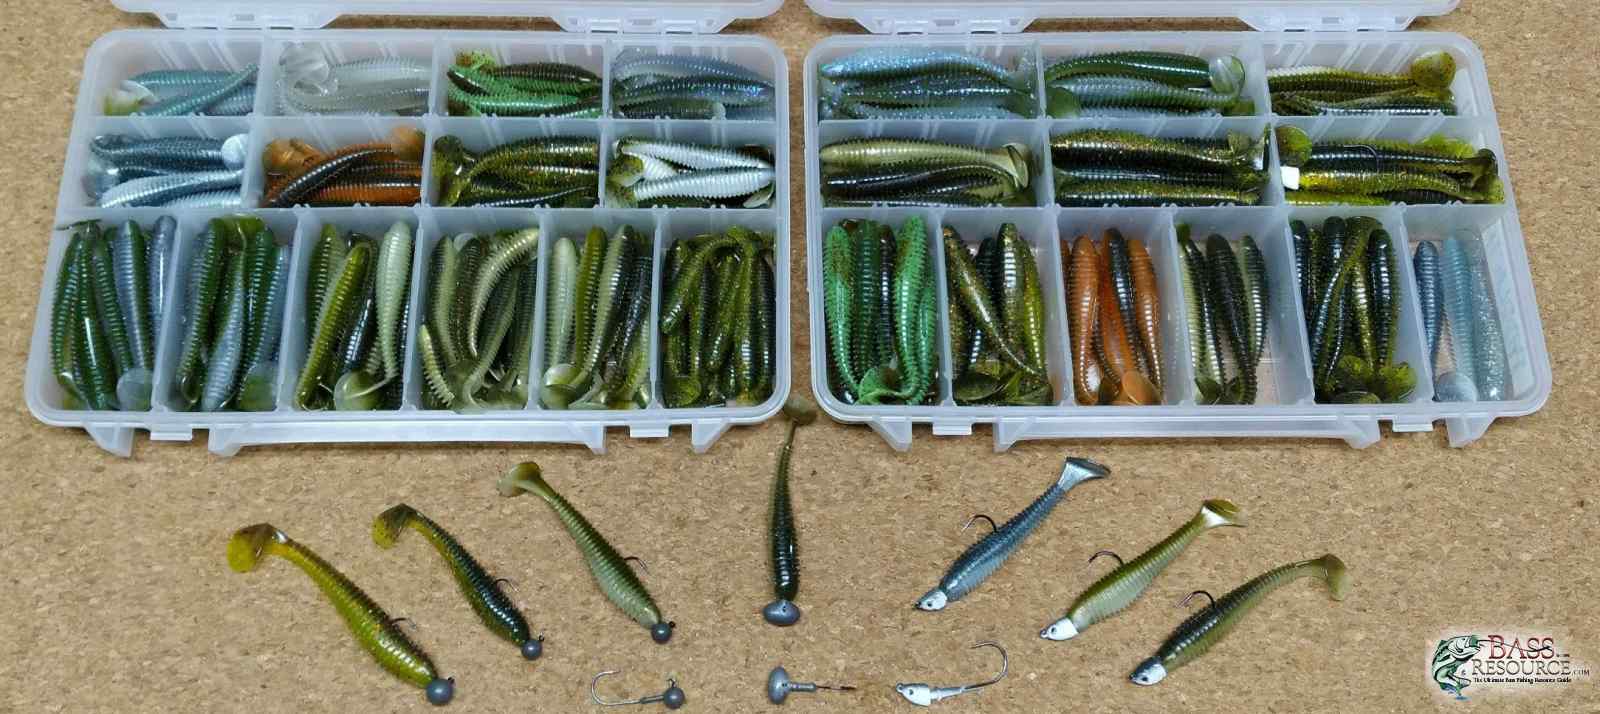 Jig Heads for Small Swimbaits - Fishing Tackle - Bass Fishing Forums